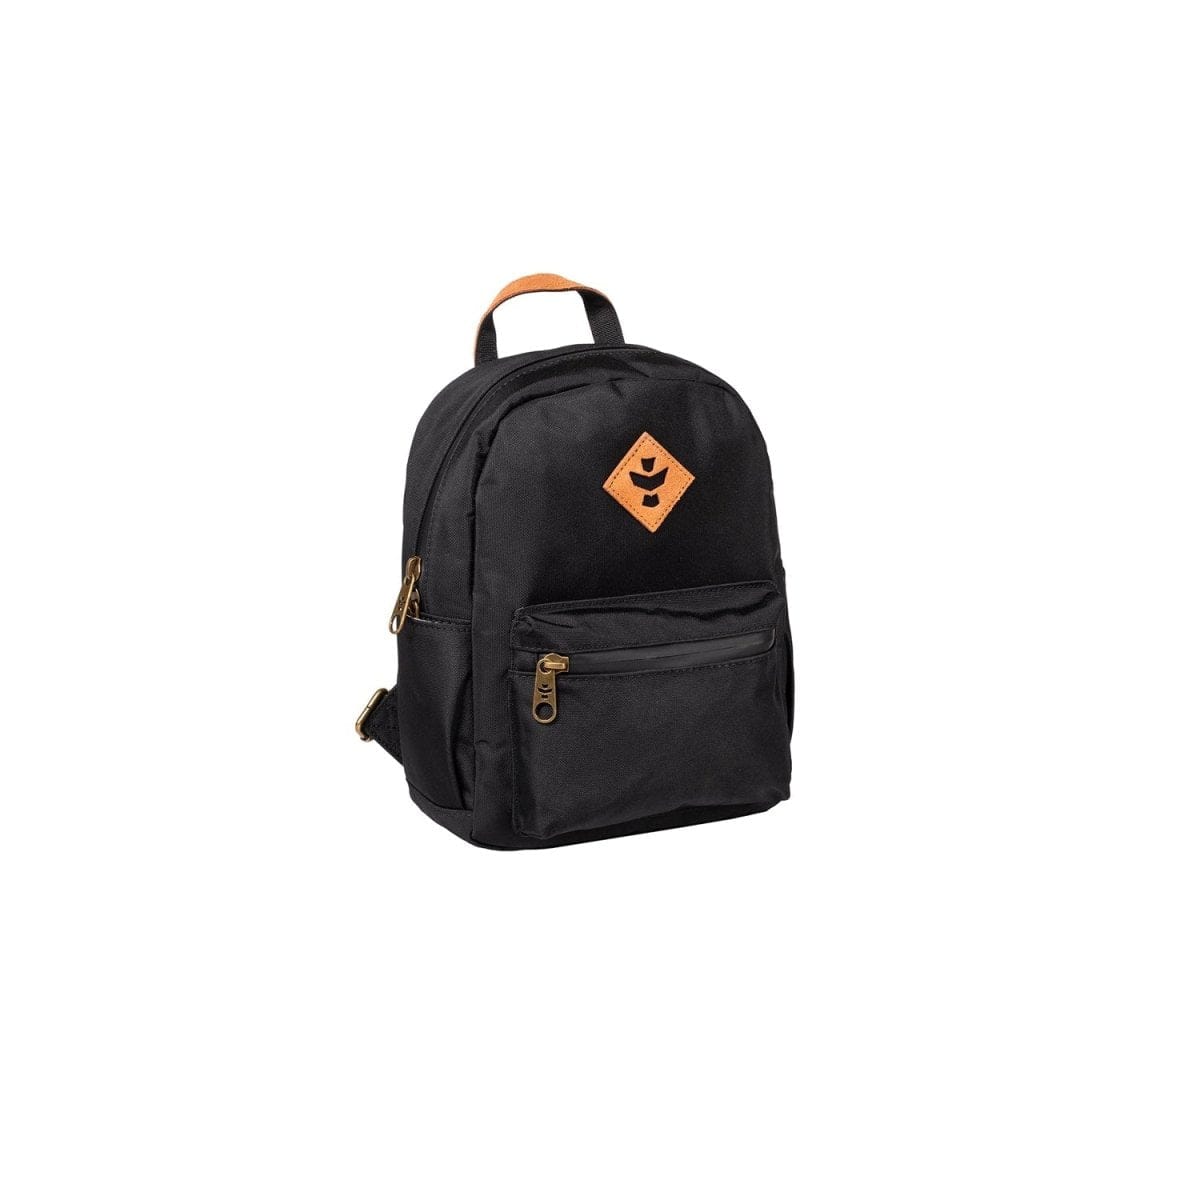 Revelry Supply Travel Bag Black The Shorty - Smell Proof Mini Backpack